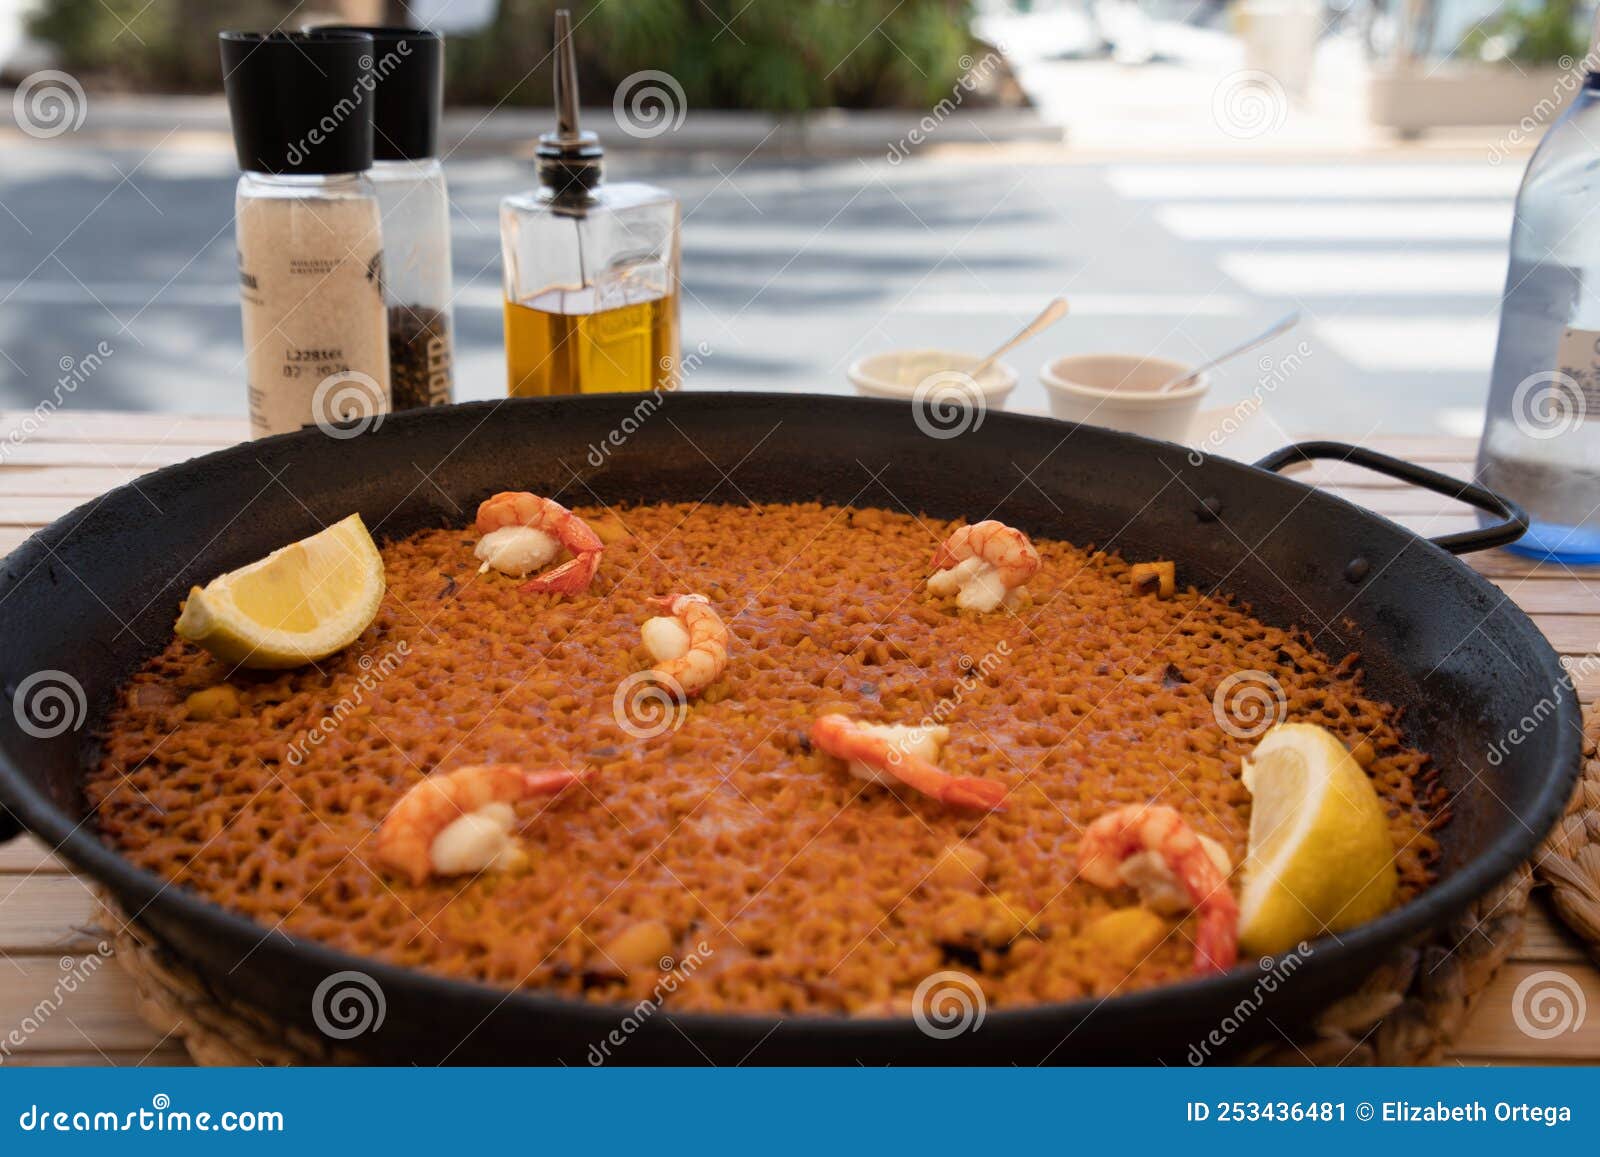 A Banda Rice Paella with Red Prawns in Alicante Stock Image - Image of ...